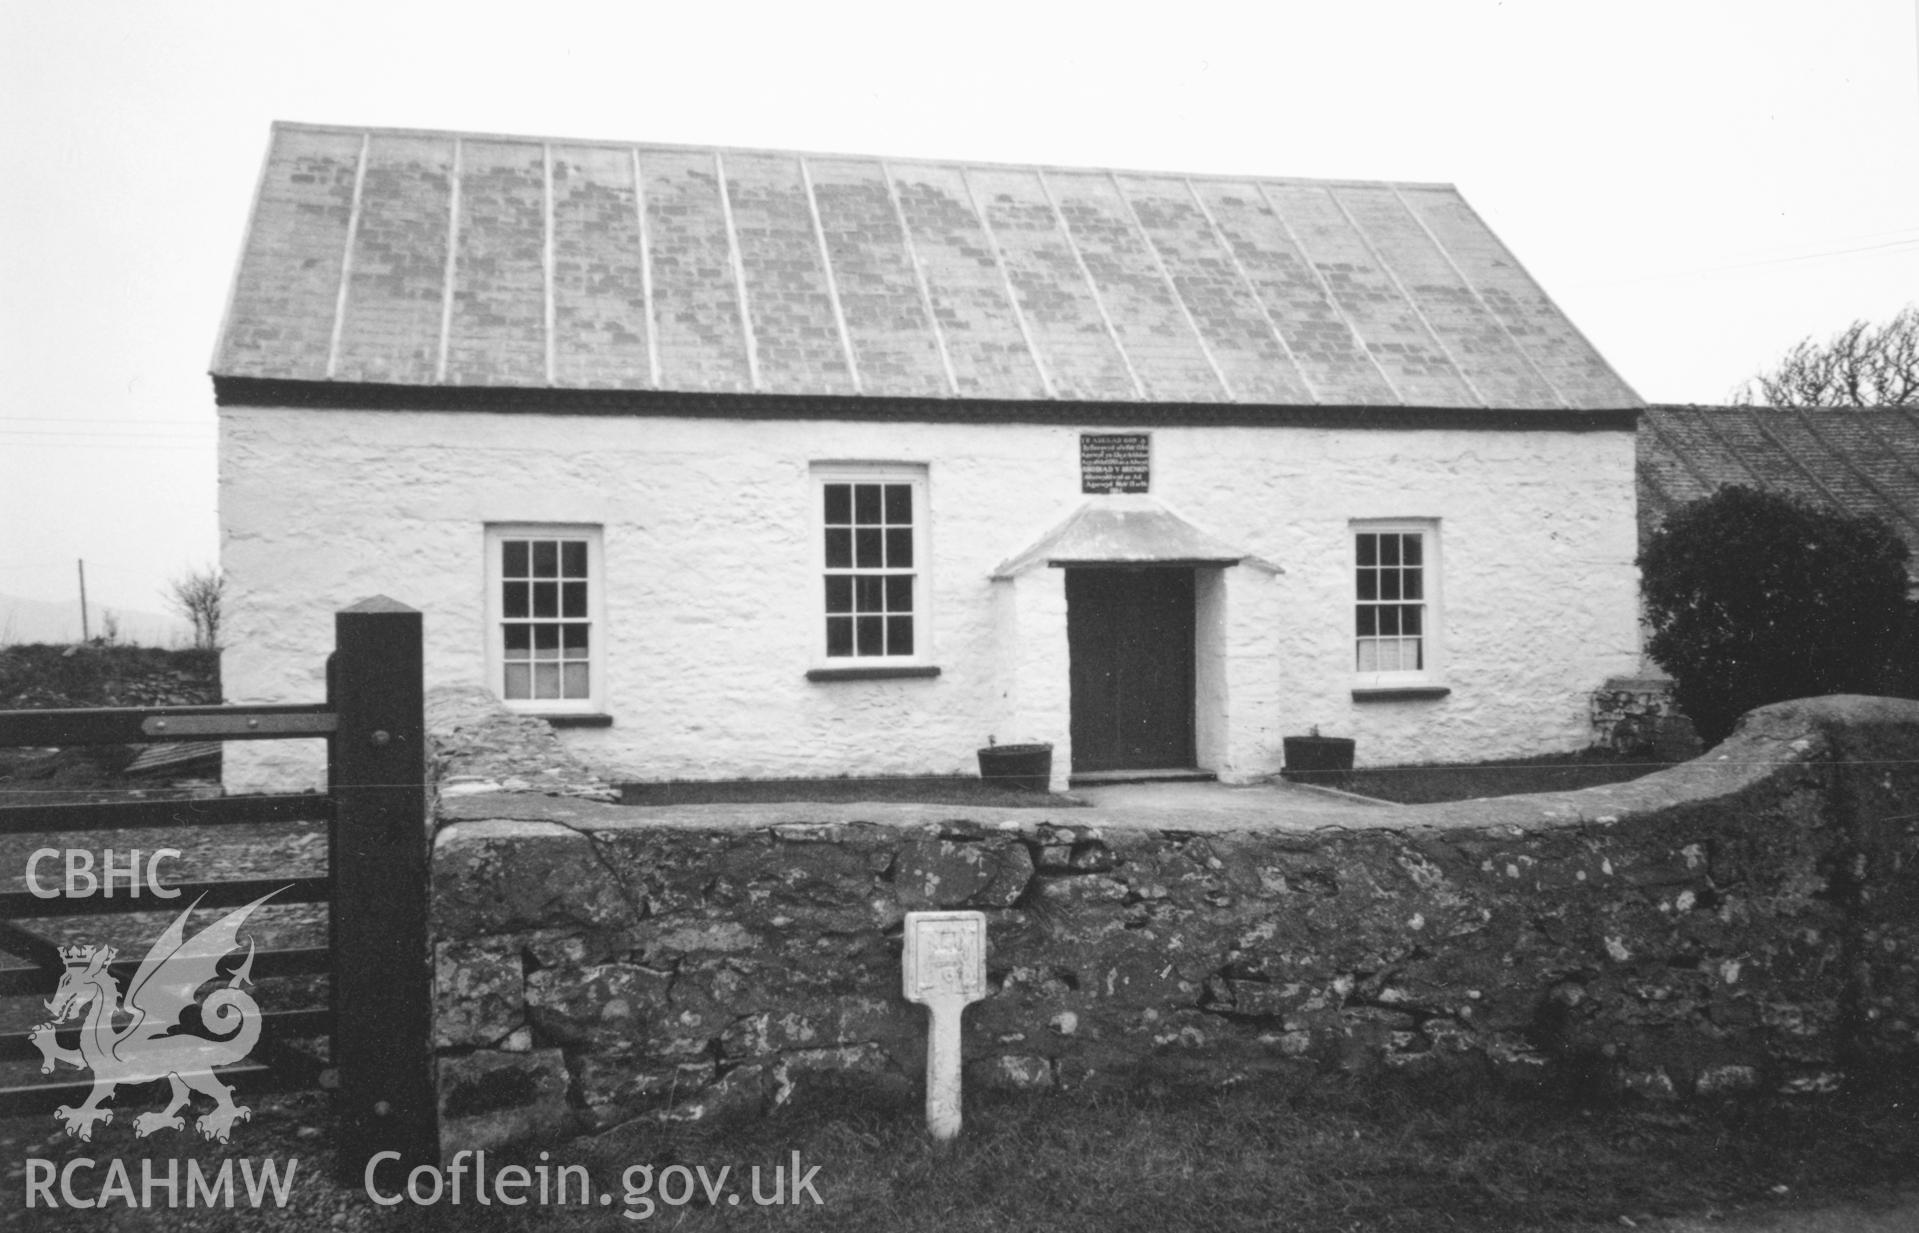 Digital copy of a black and white photograph showing an exterior view of Rhodiad Congregational Chapel, St Davids, taken by Robert Scourfield, 1996.